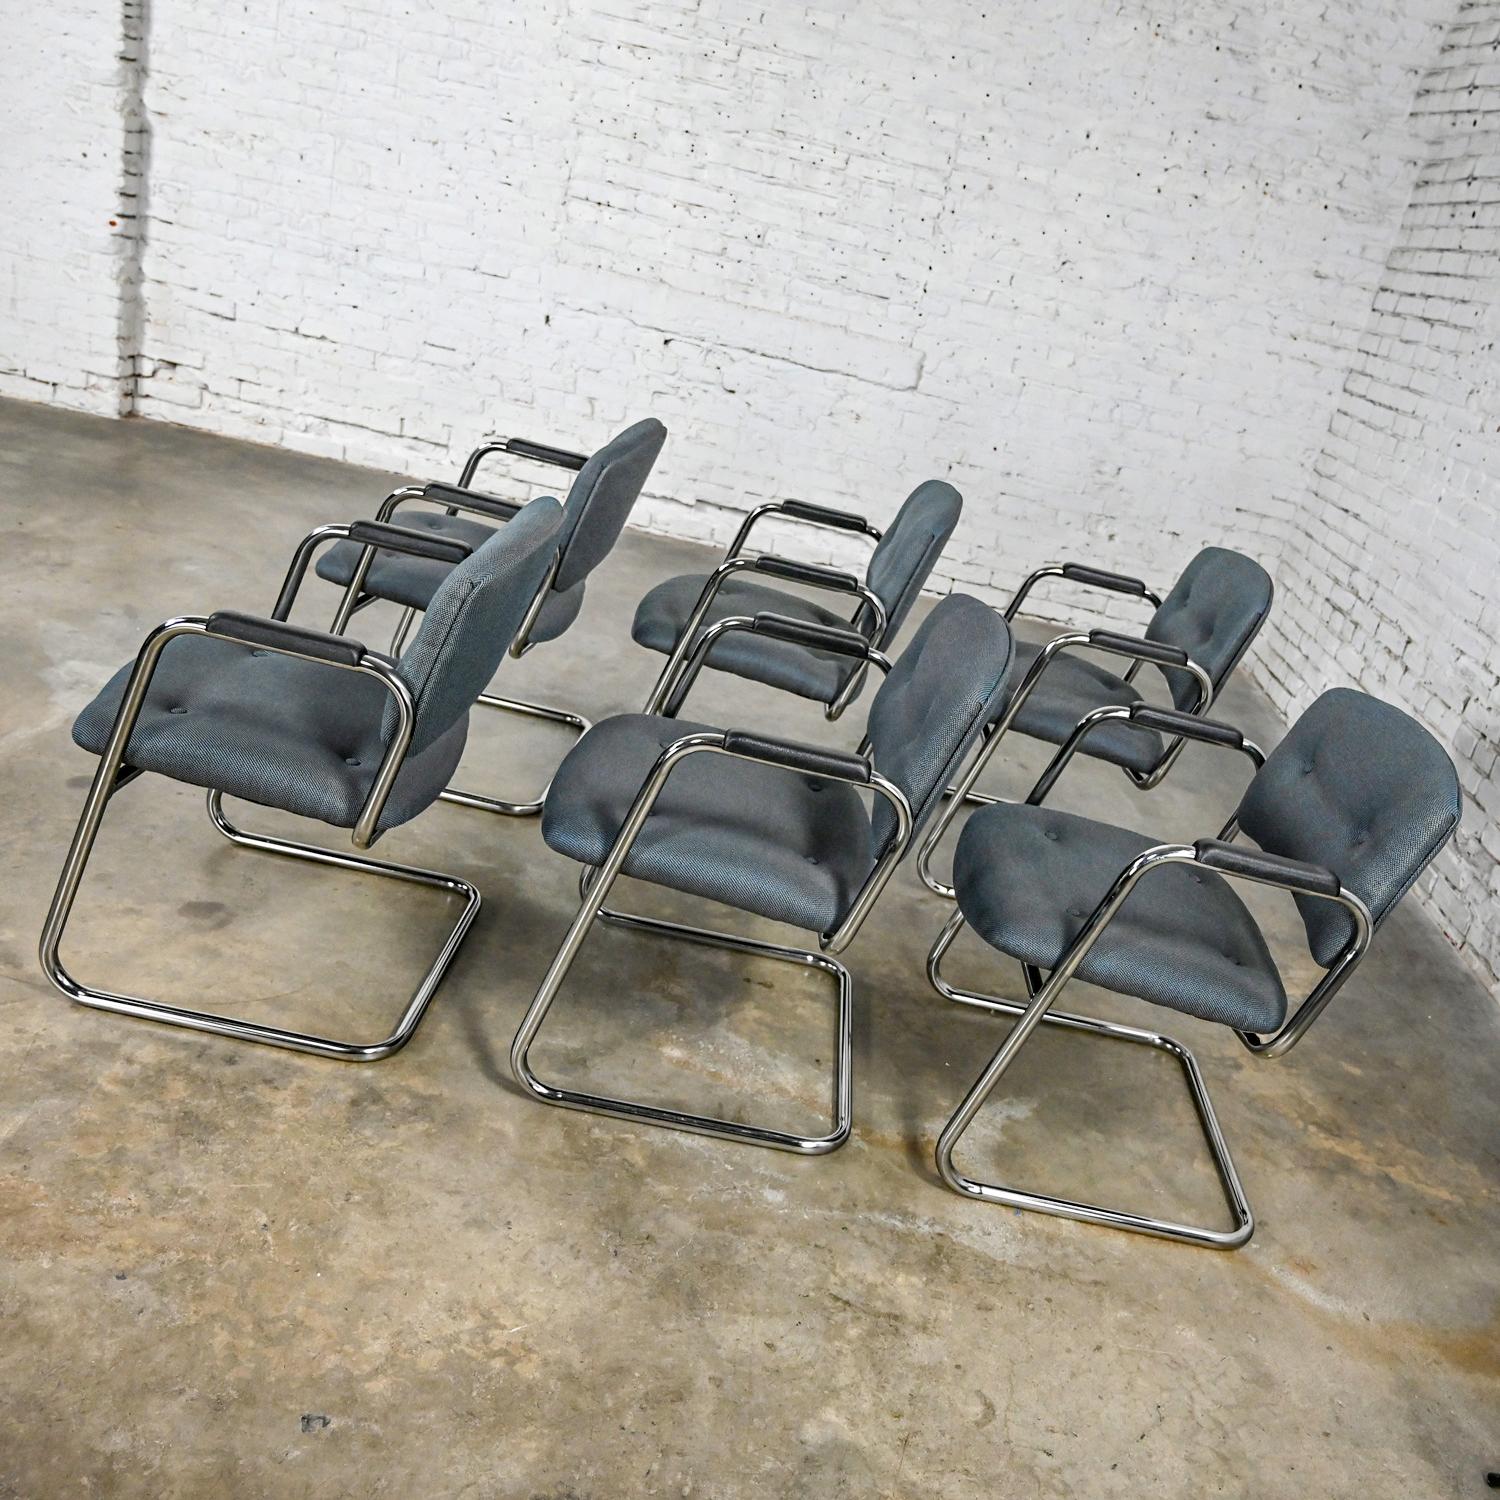 Late 20th Century Gray & Chrome Cantilever Chairs Style Steelcase Set of 6 For Sale 1